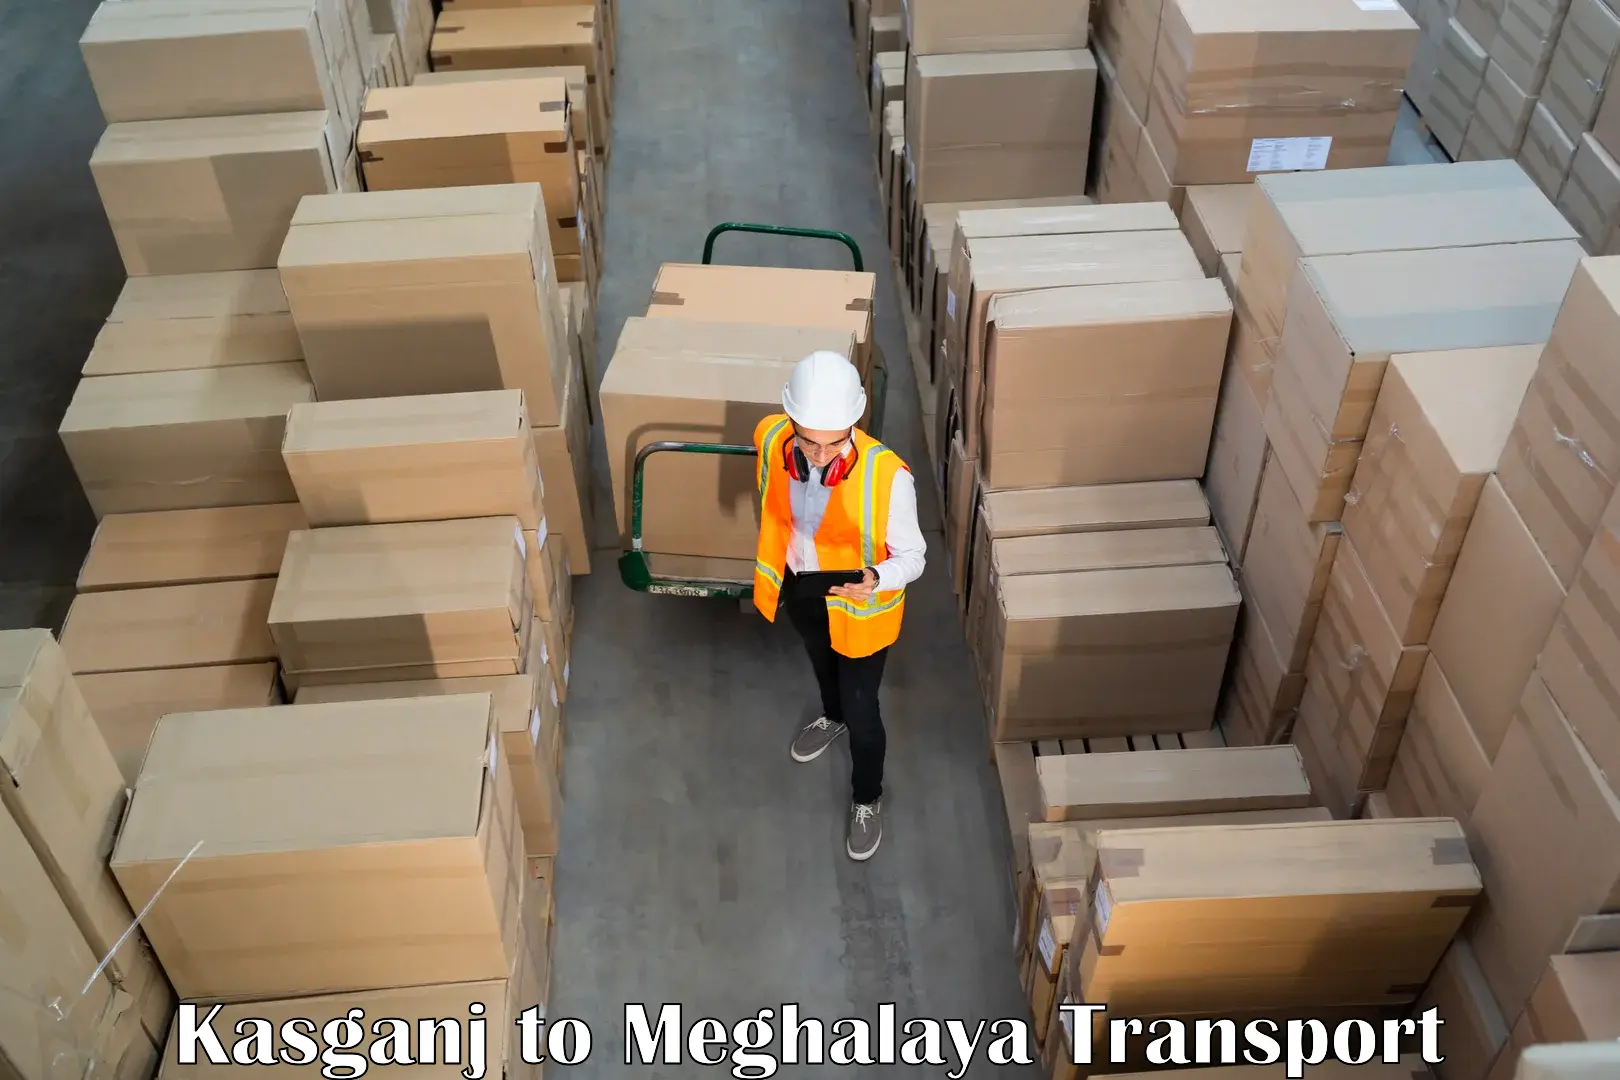 Truck transport companies in India Kasganj to Umsaw